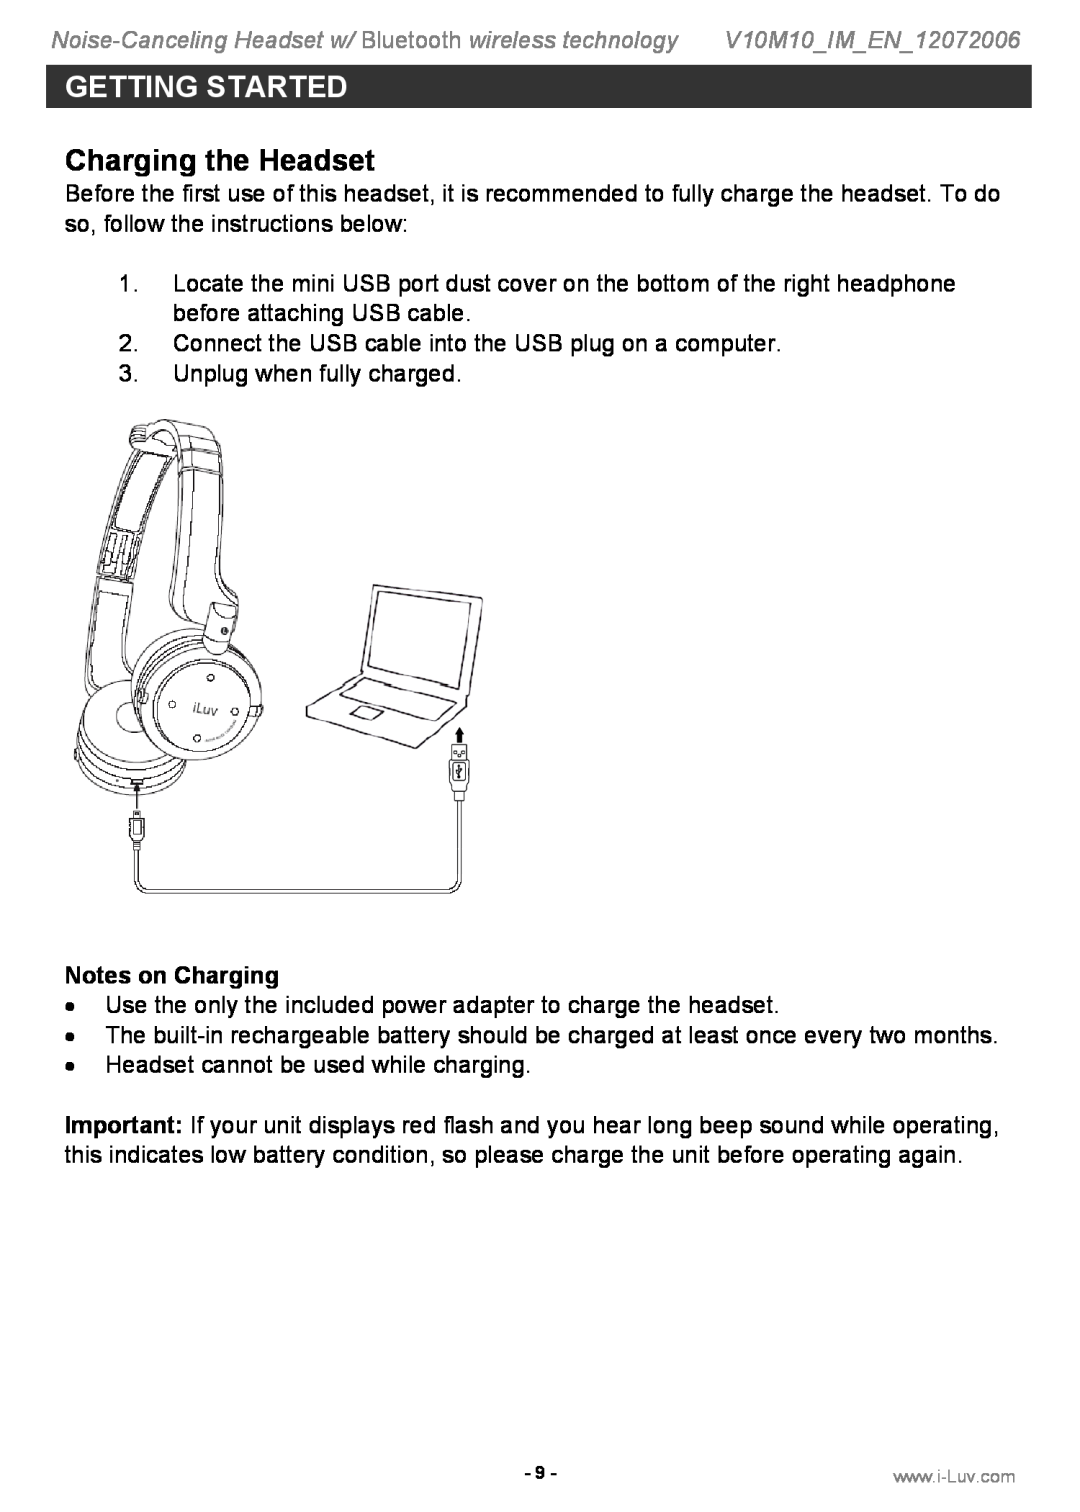 Iluv i913 instruction manual Charging the Headset, Notes on Charging, Getting Started 